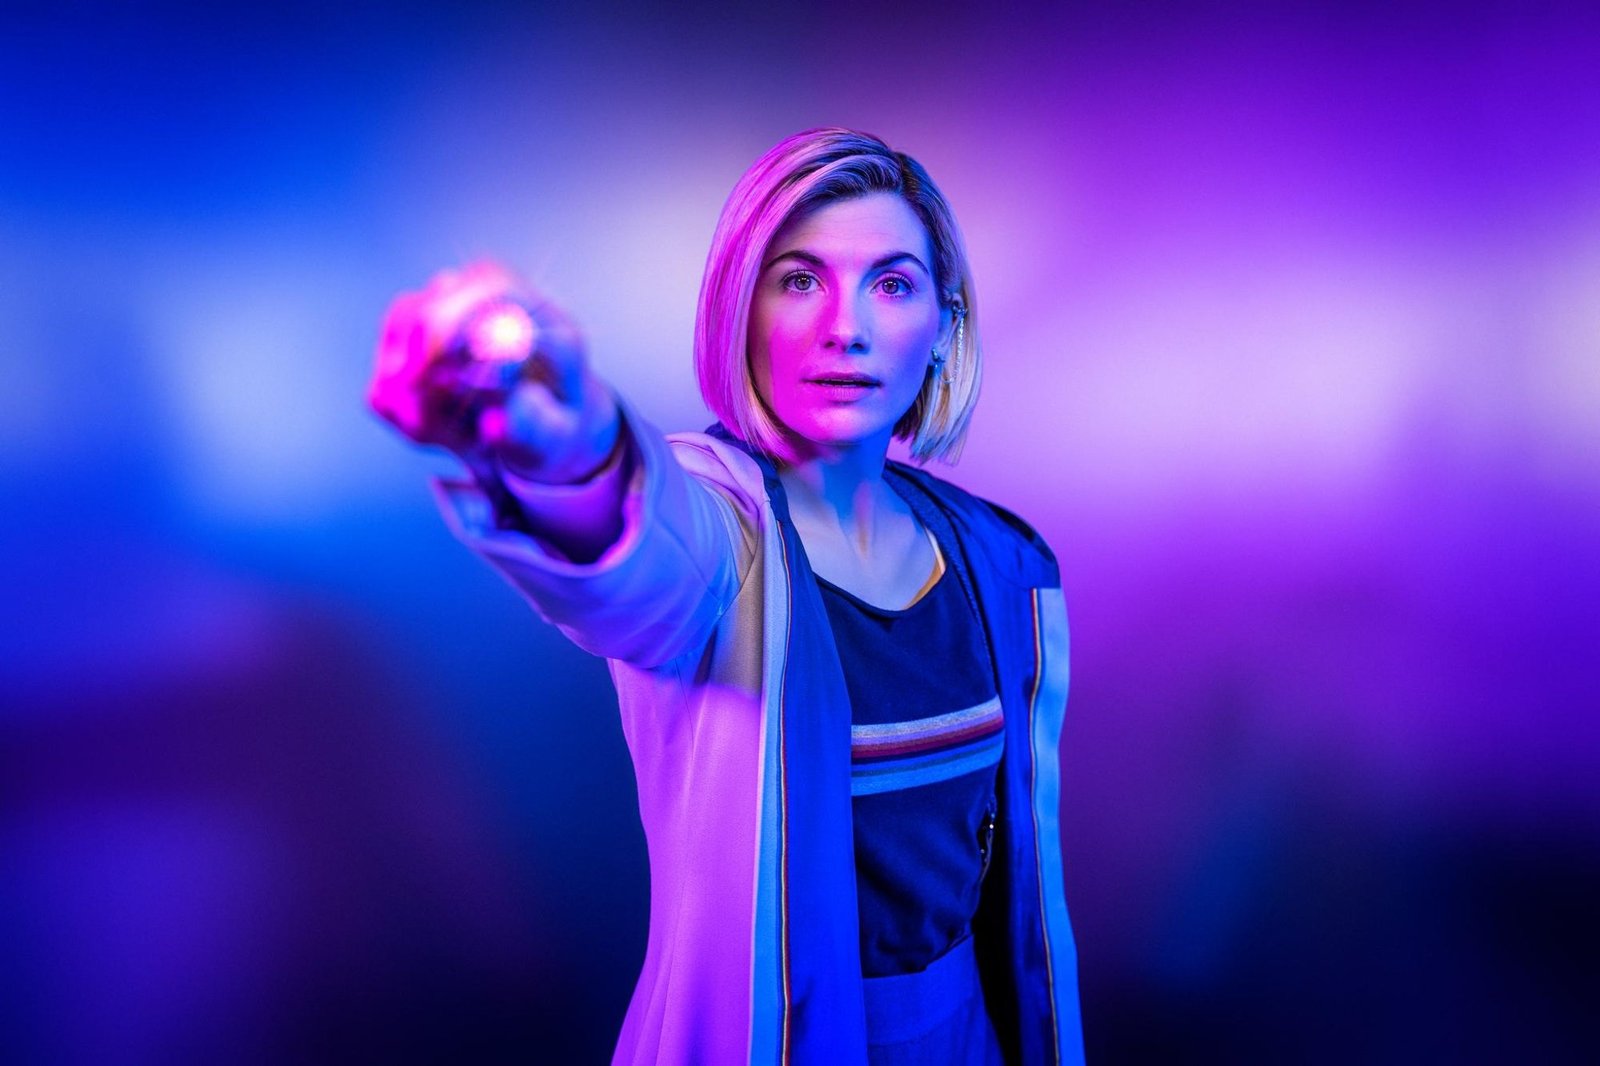 The Last Episode with Jodie Whittaker’s Thirteenth Doctor Is The Power of the Doctor